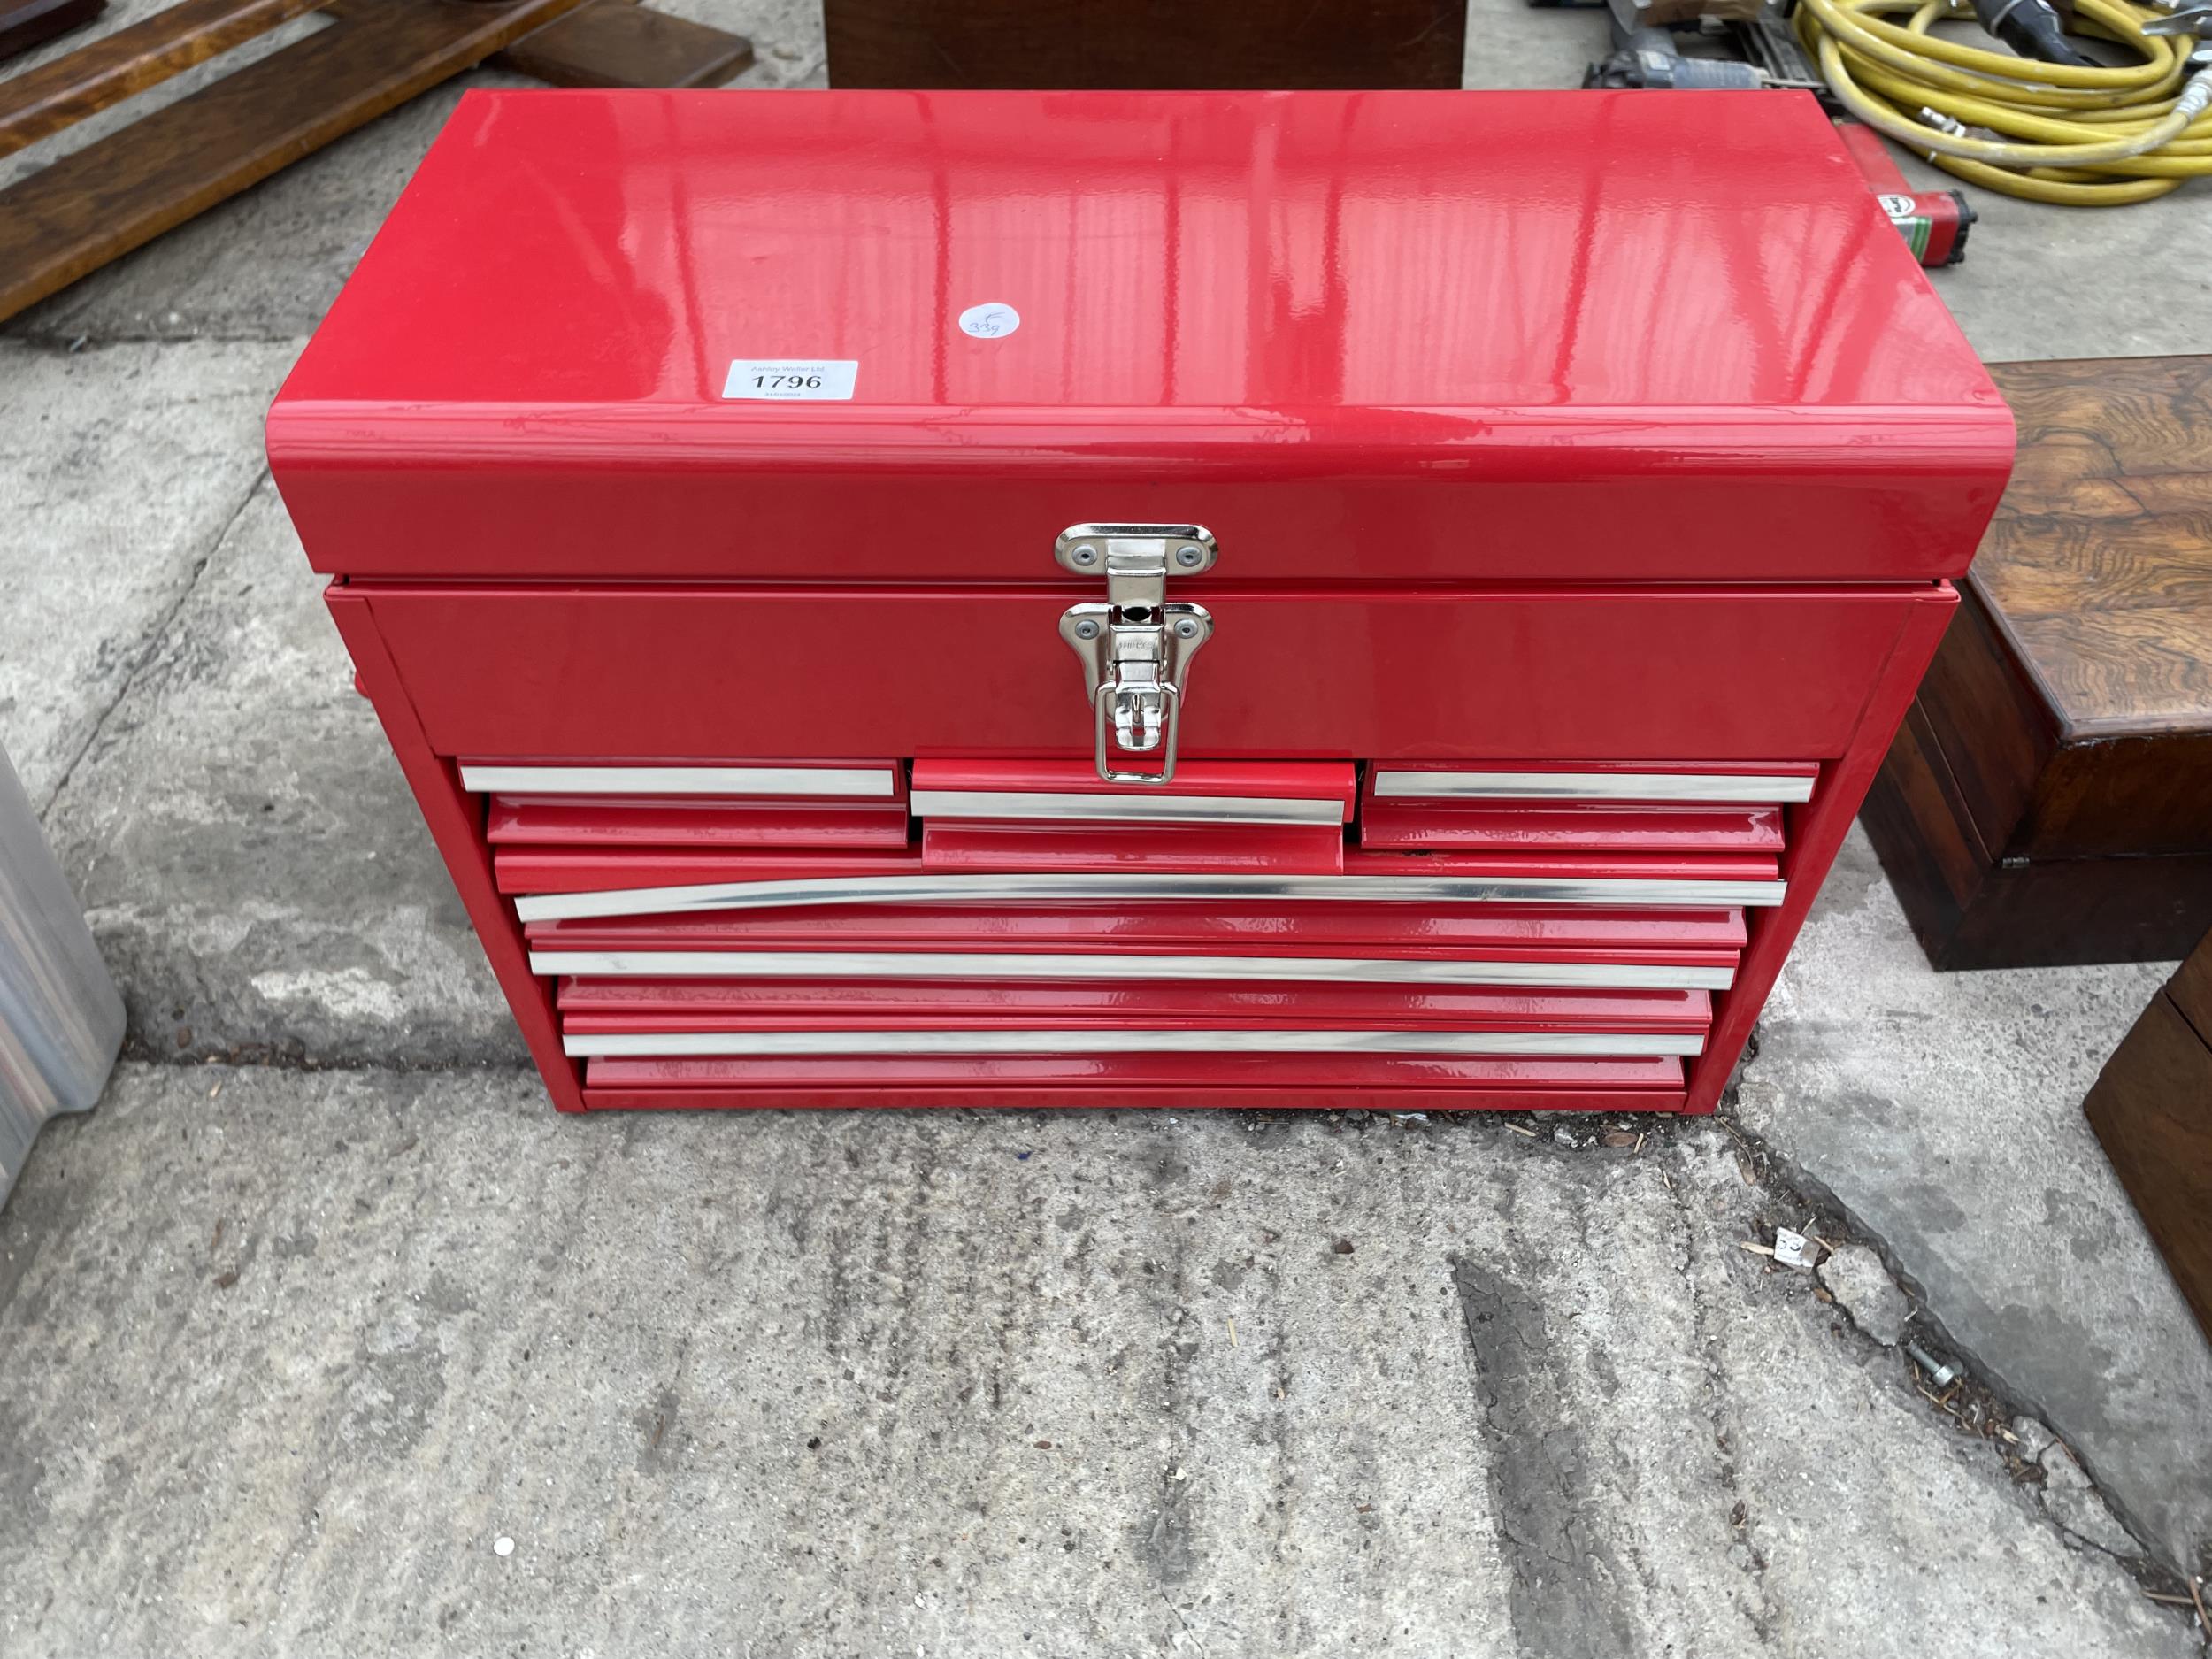 A RED METAL WORKSHOP TOOL BOX WITH SIX DRAWERS AND A TOP STORAGE COMPARTMENT